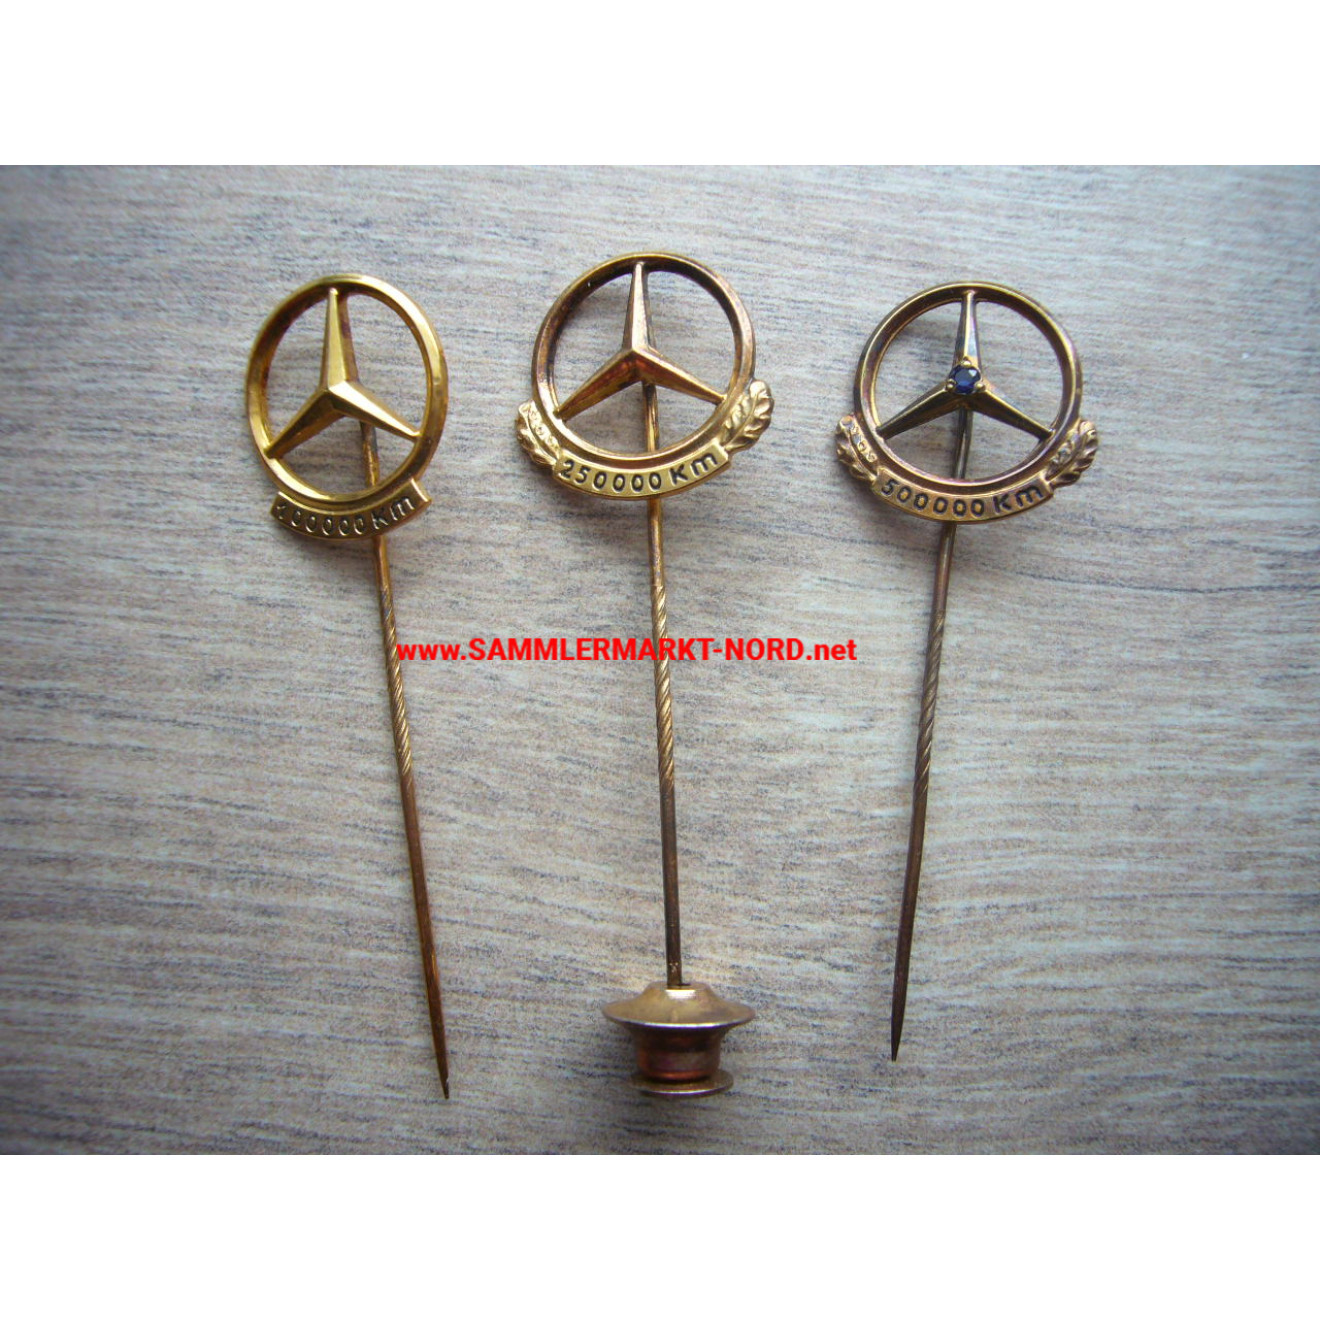 Mercedes Benz - 3 x badges of honor for 100,000 km, 250,000 km & 500,000 km